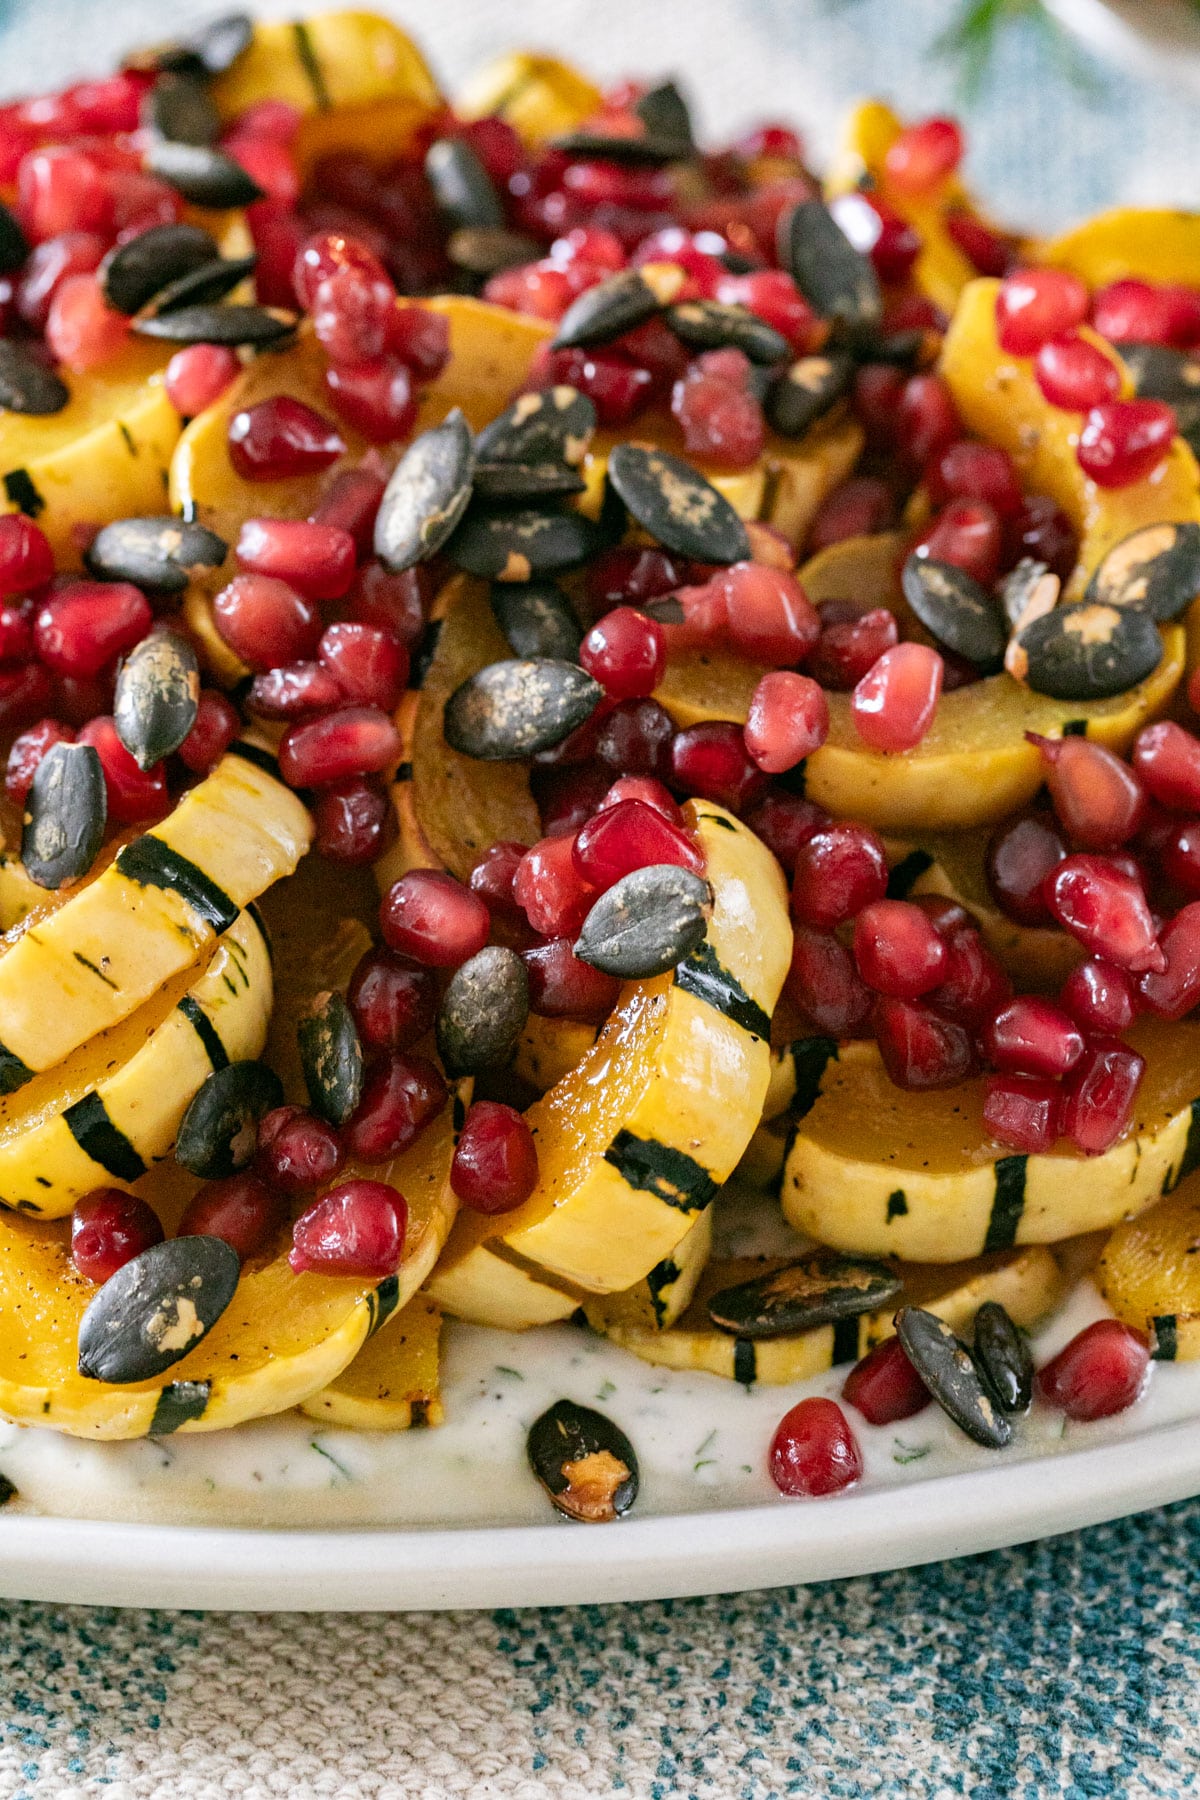 A close up image of he squahs with pomegrate seeds and pumpkin seeds on a platter over yogurt.